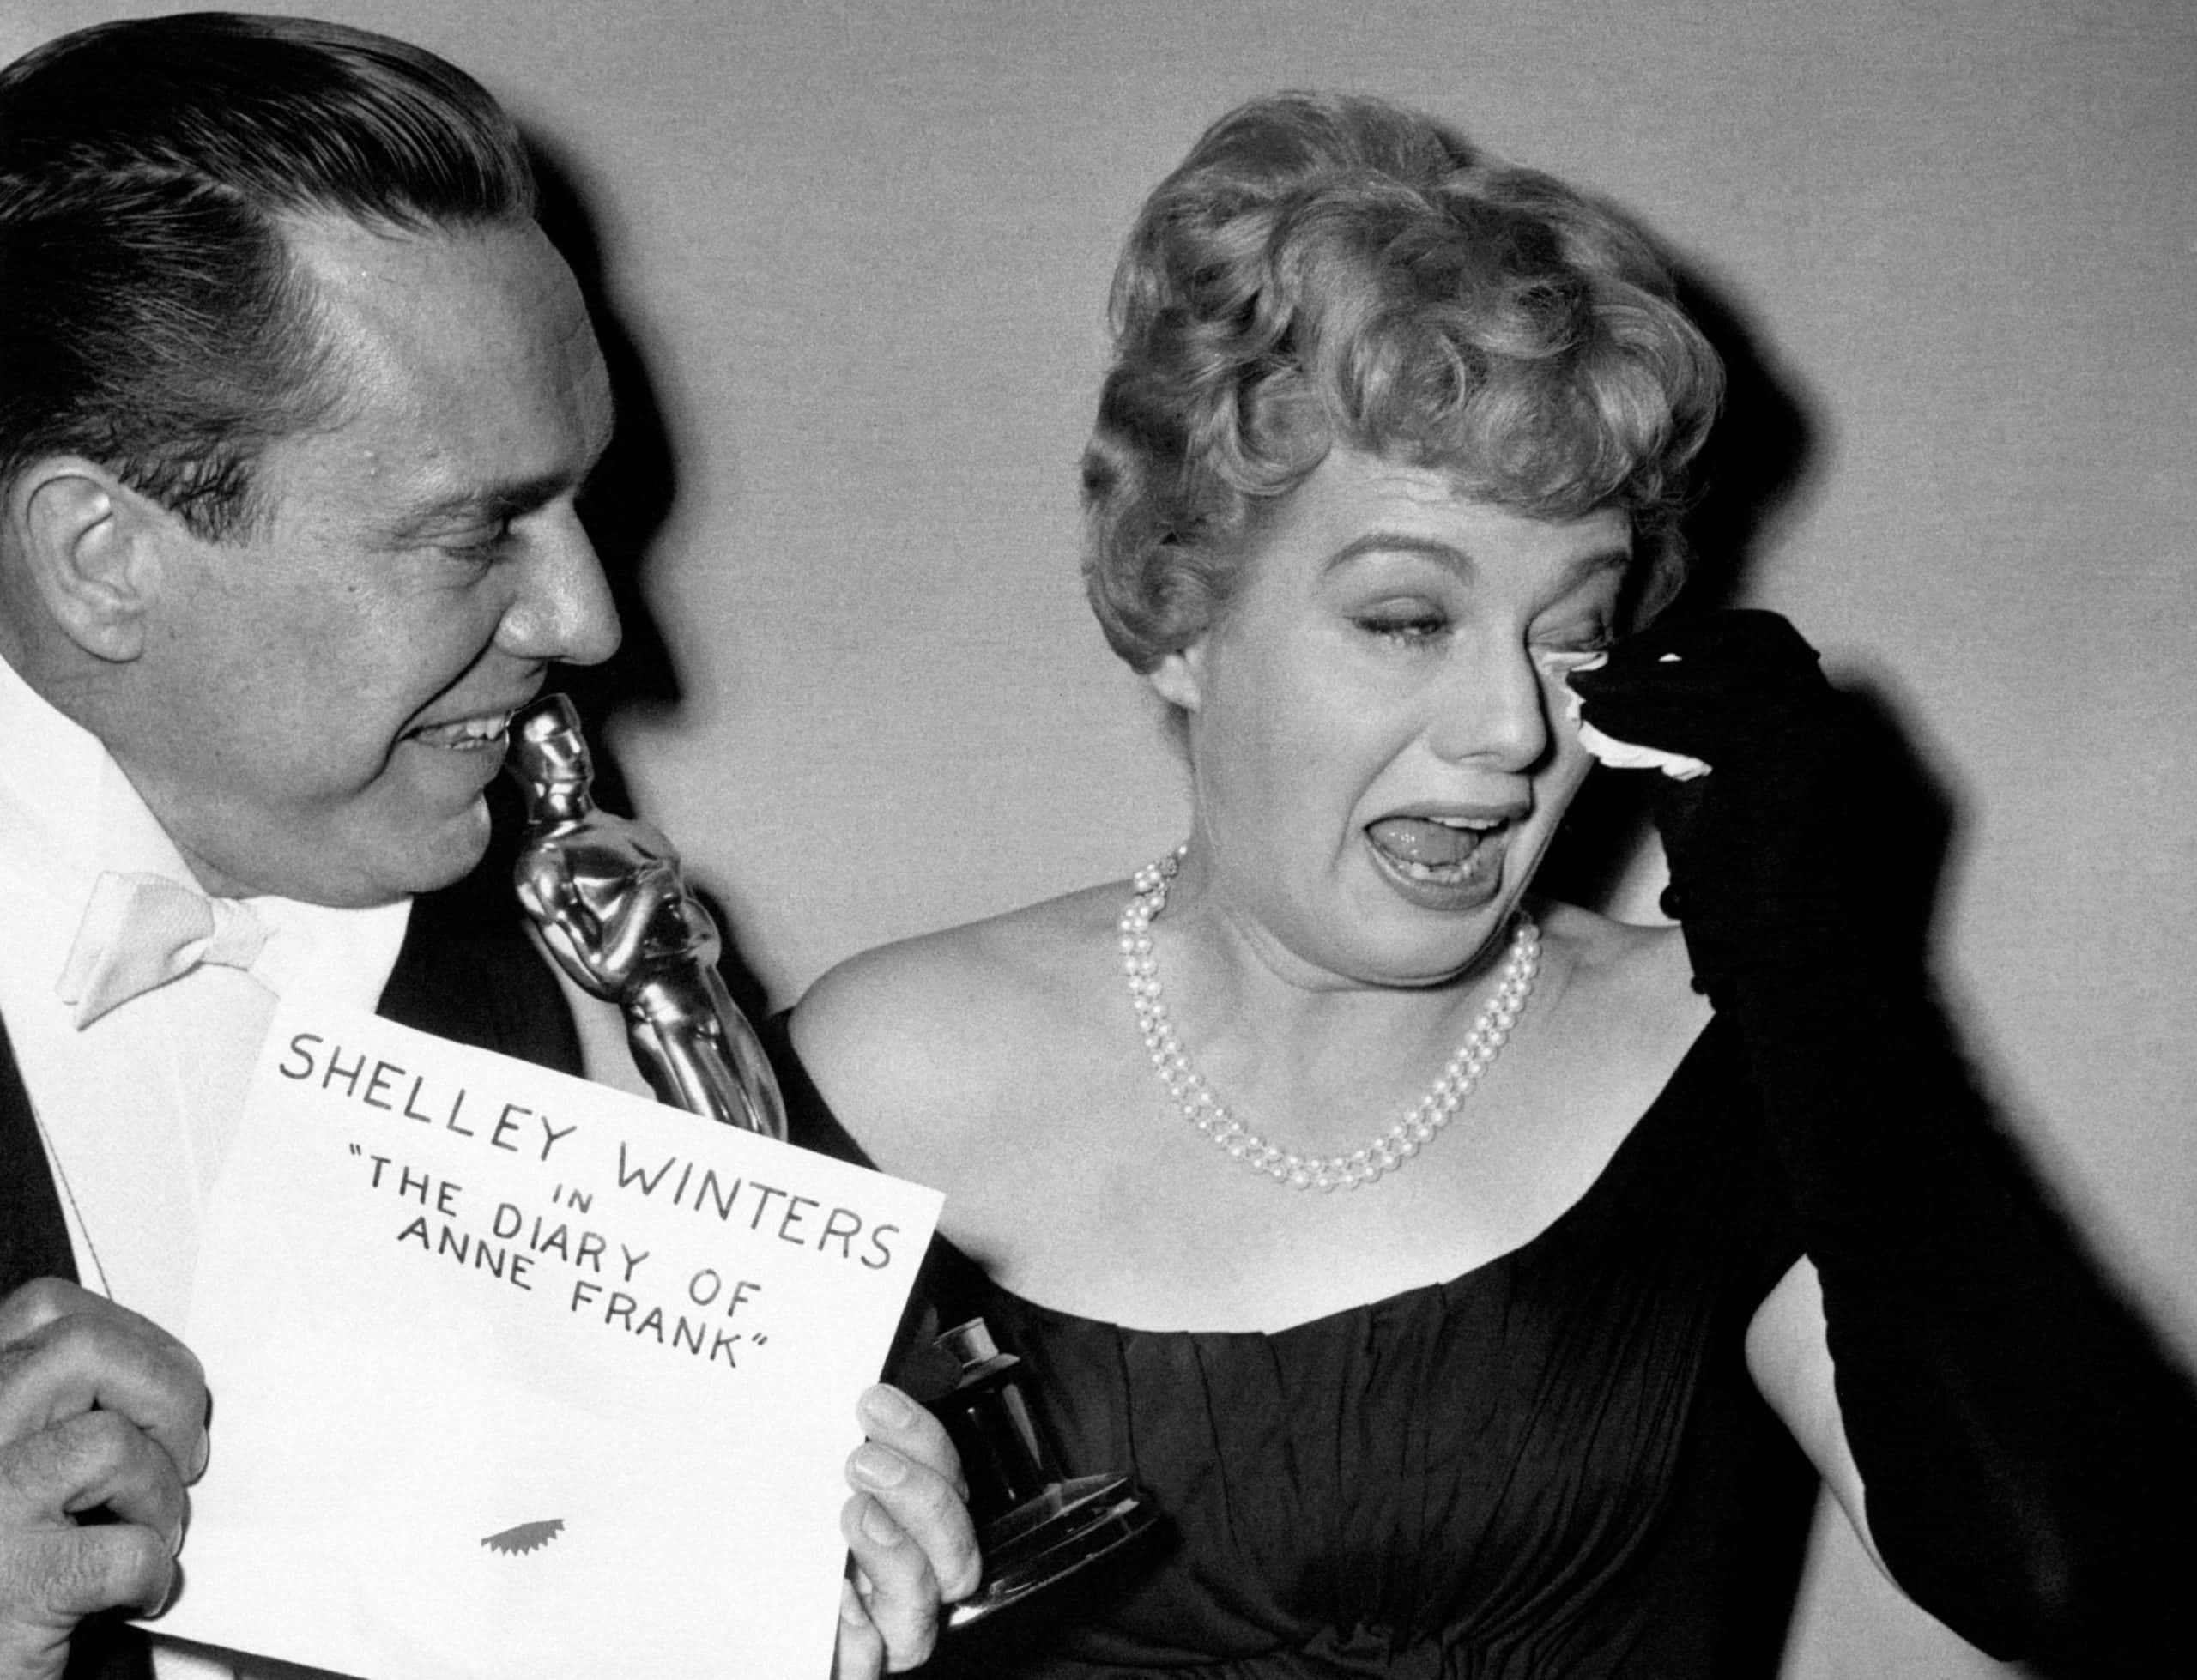 Oliver Reed vs. Shelley Winters: A Battle to Remember